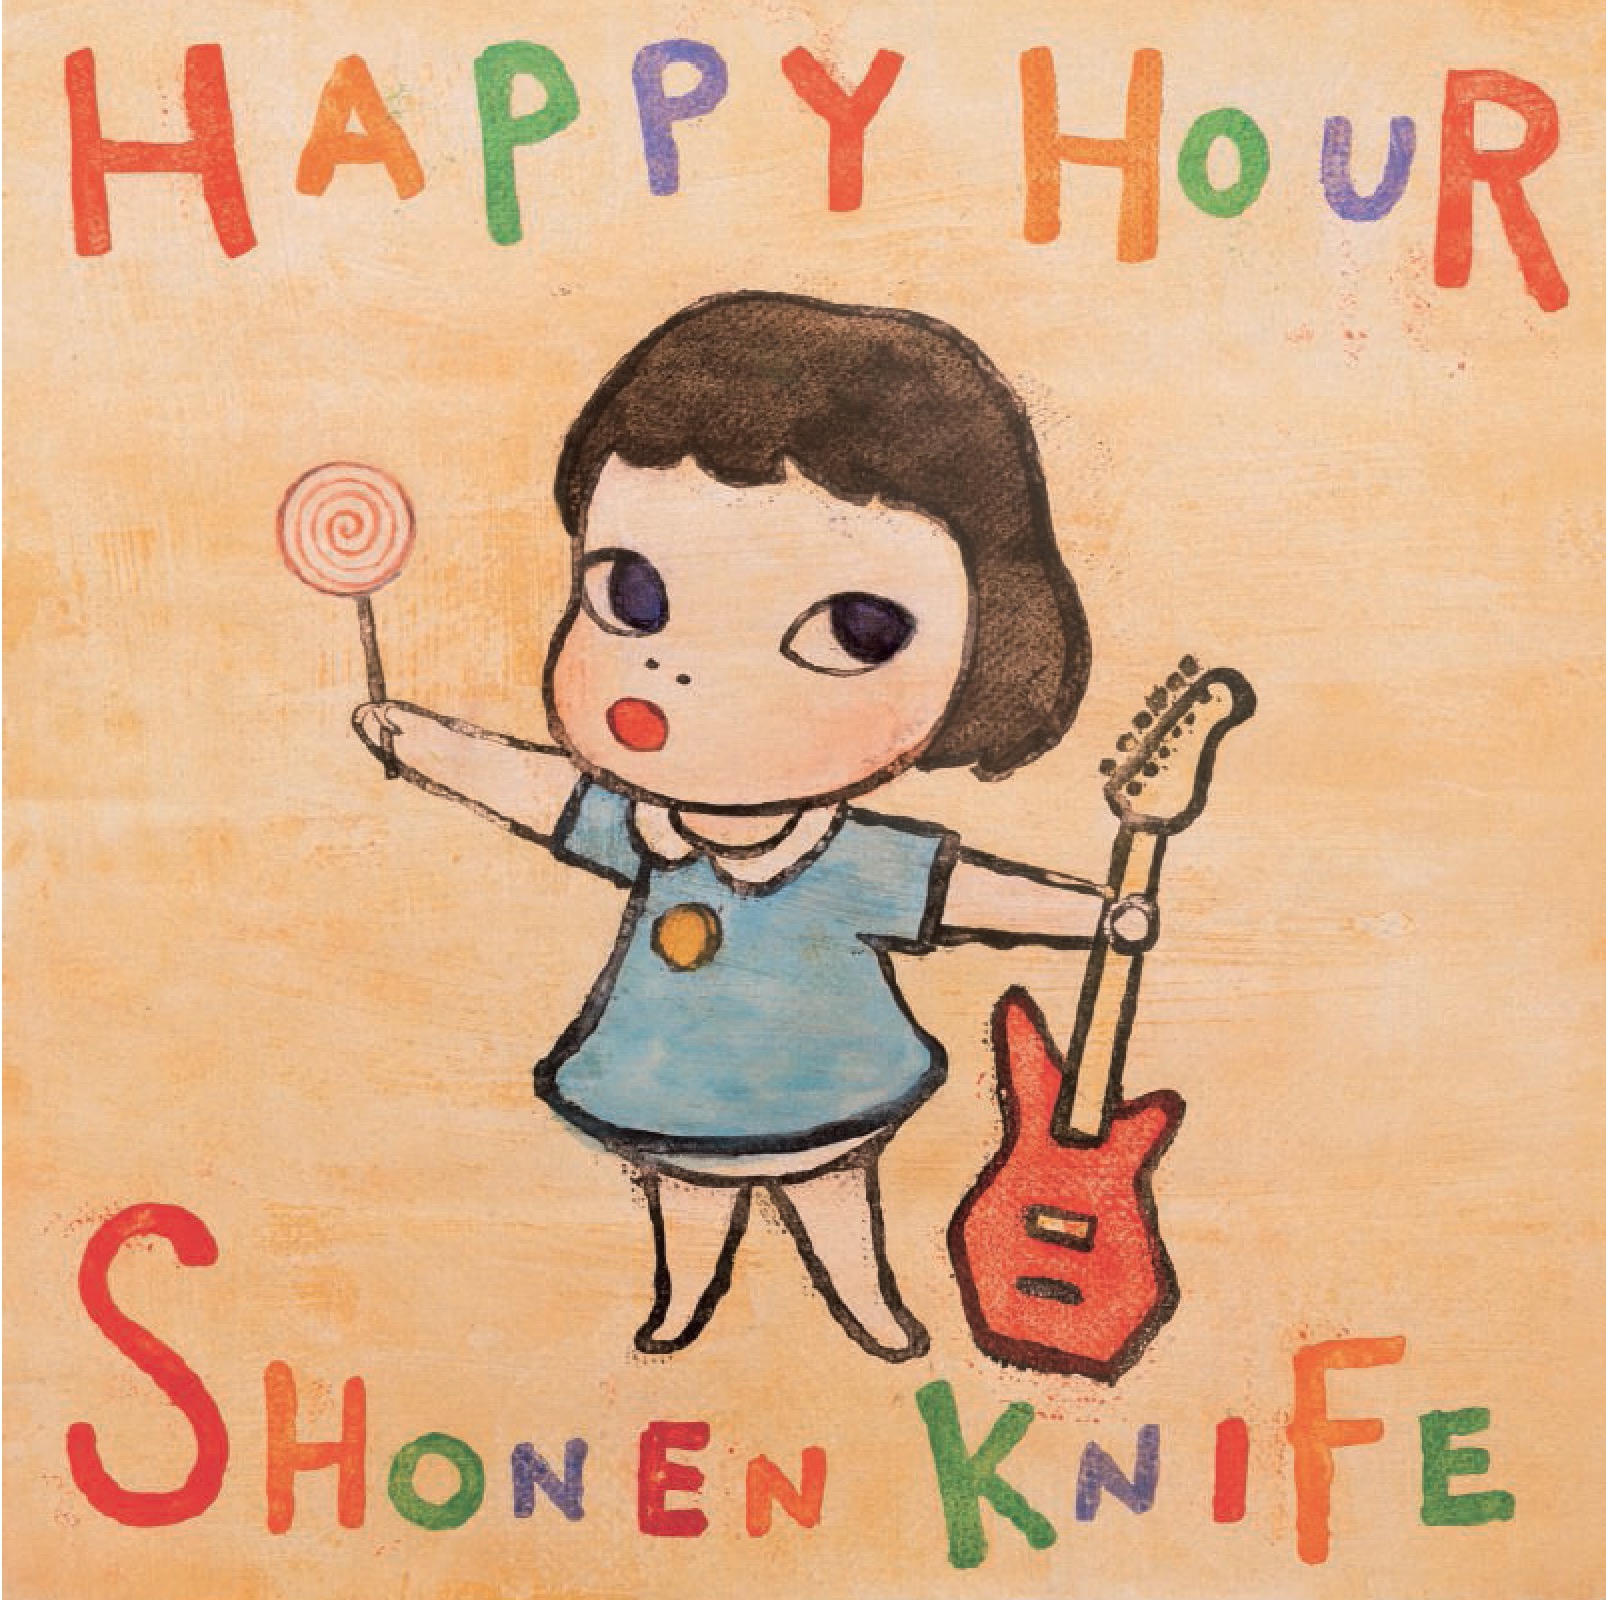 Happy Hour album cover for Shonen Knife - picture courtesy Big Deal Records